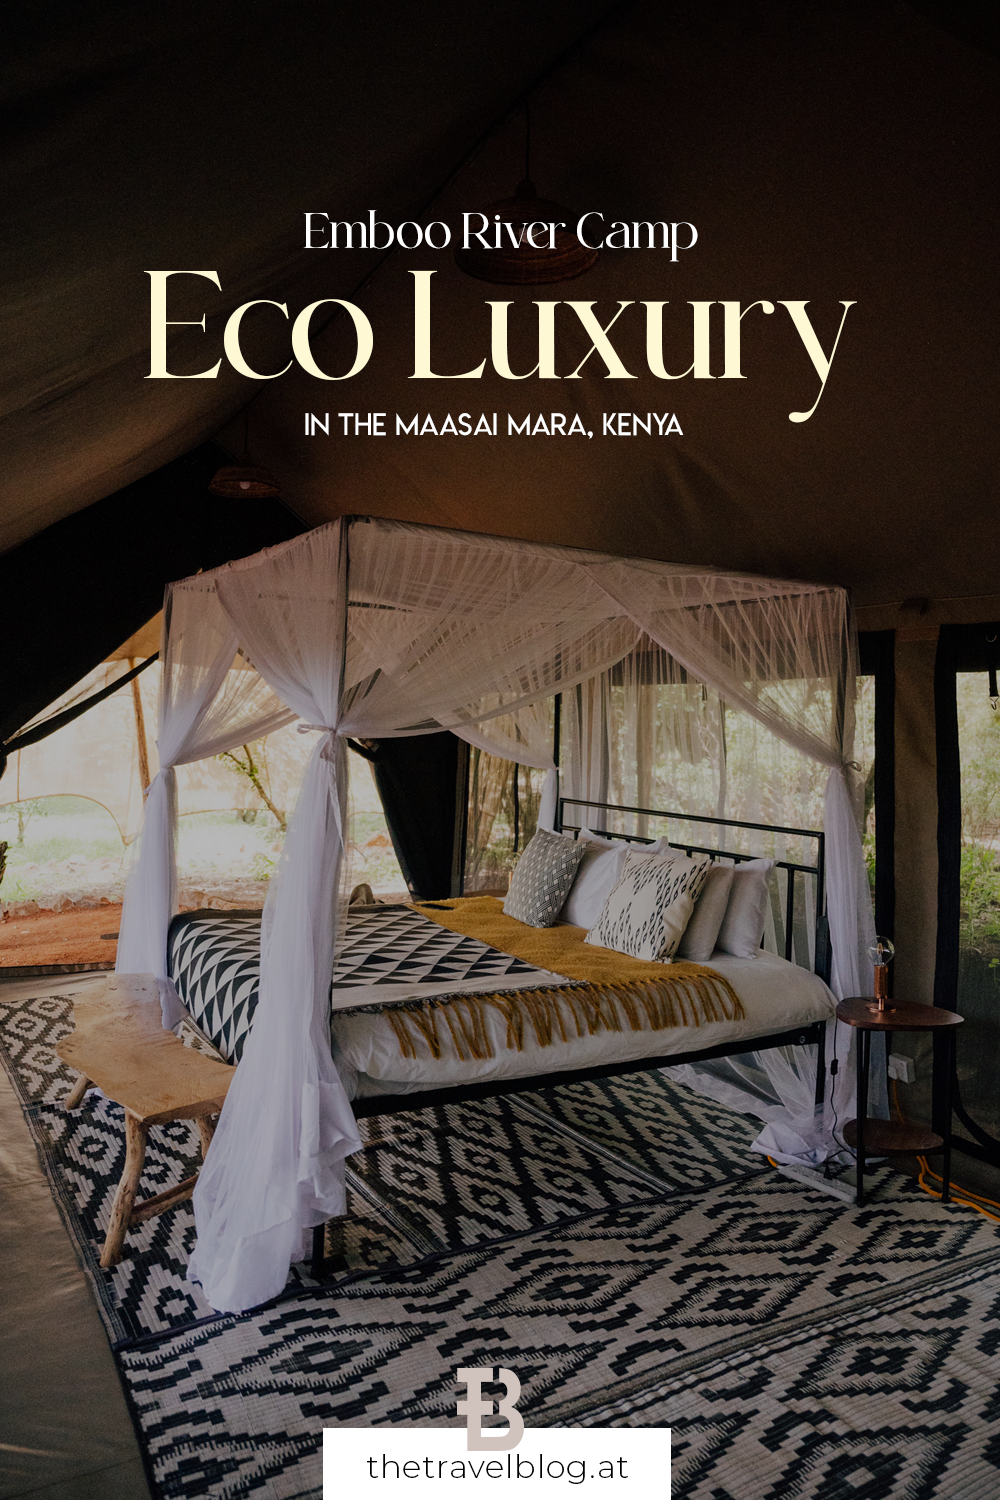 Eco luxury in the Maasai Mara in Kenya with Emboo River Camp - 100% carbon neutral camp with electric vehicles